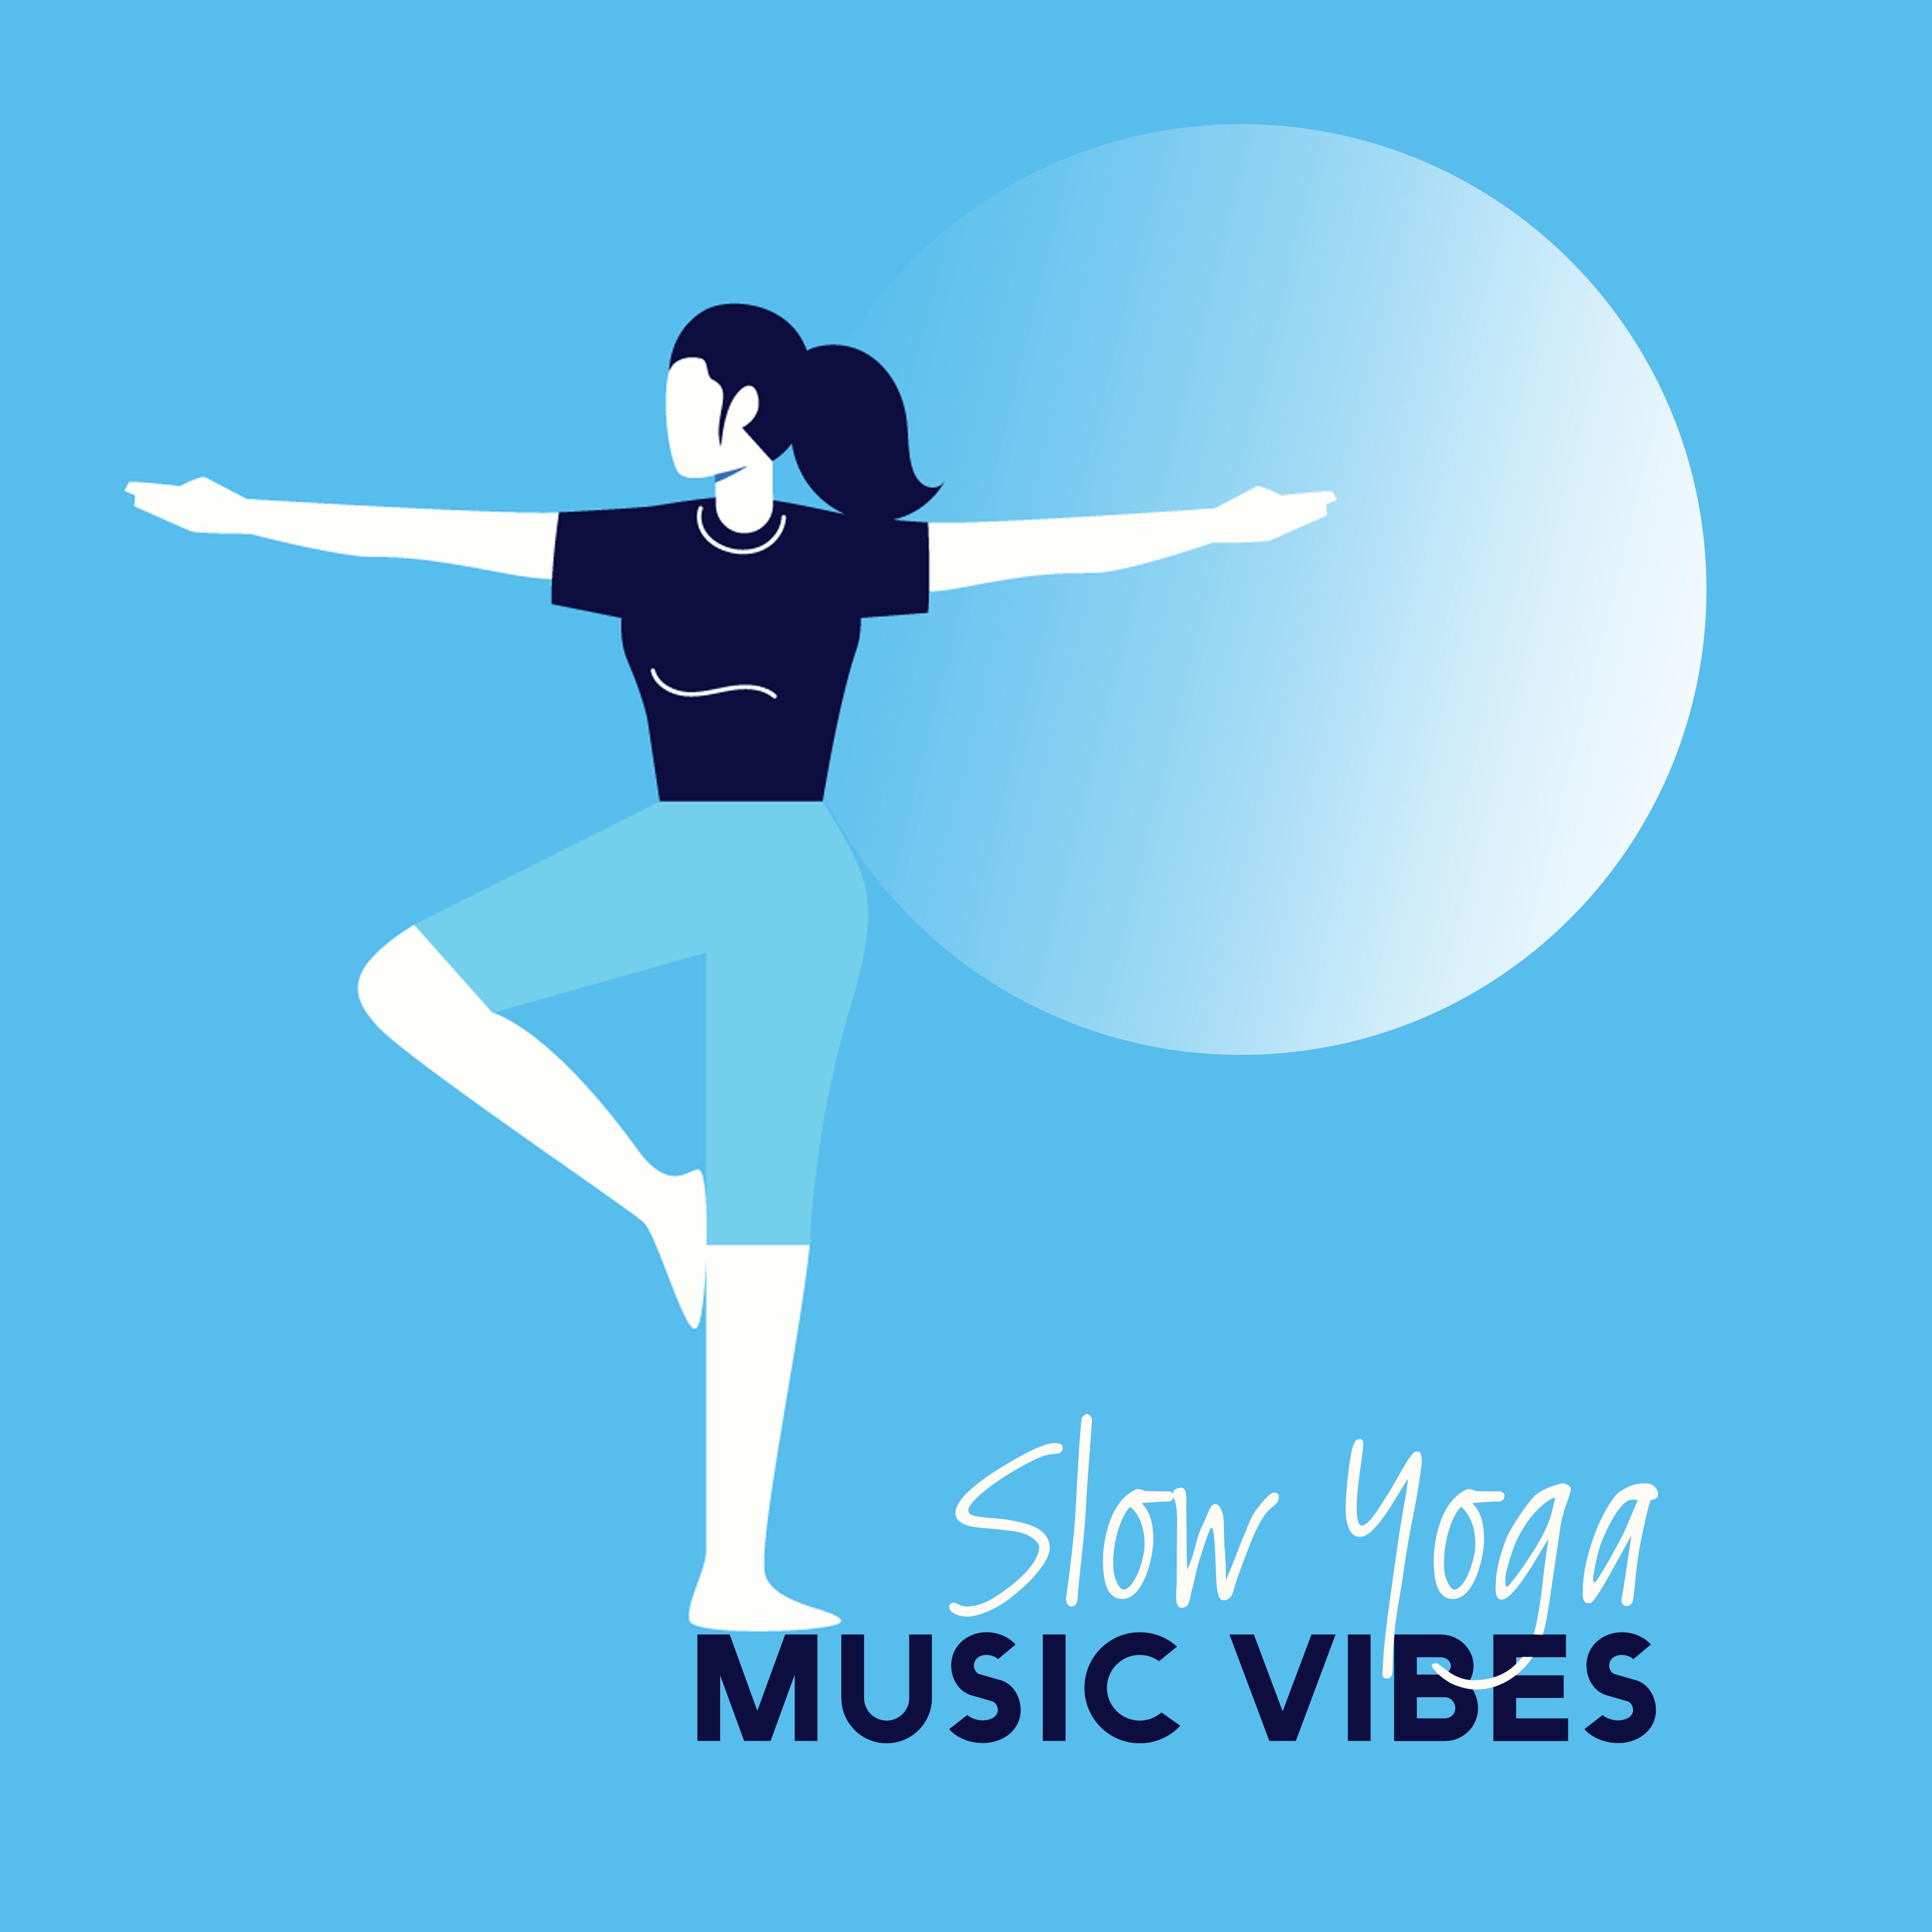 Slow Yoga Music Vibes: New Age 2019 Selection for Meditation & Relaxation, Zen Music, Chakra Healing, Mantra